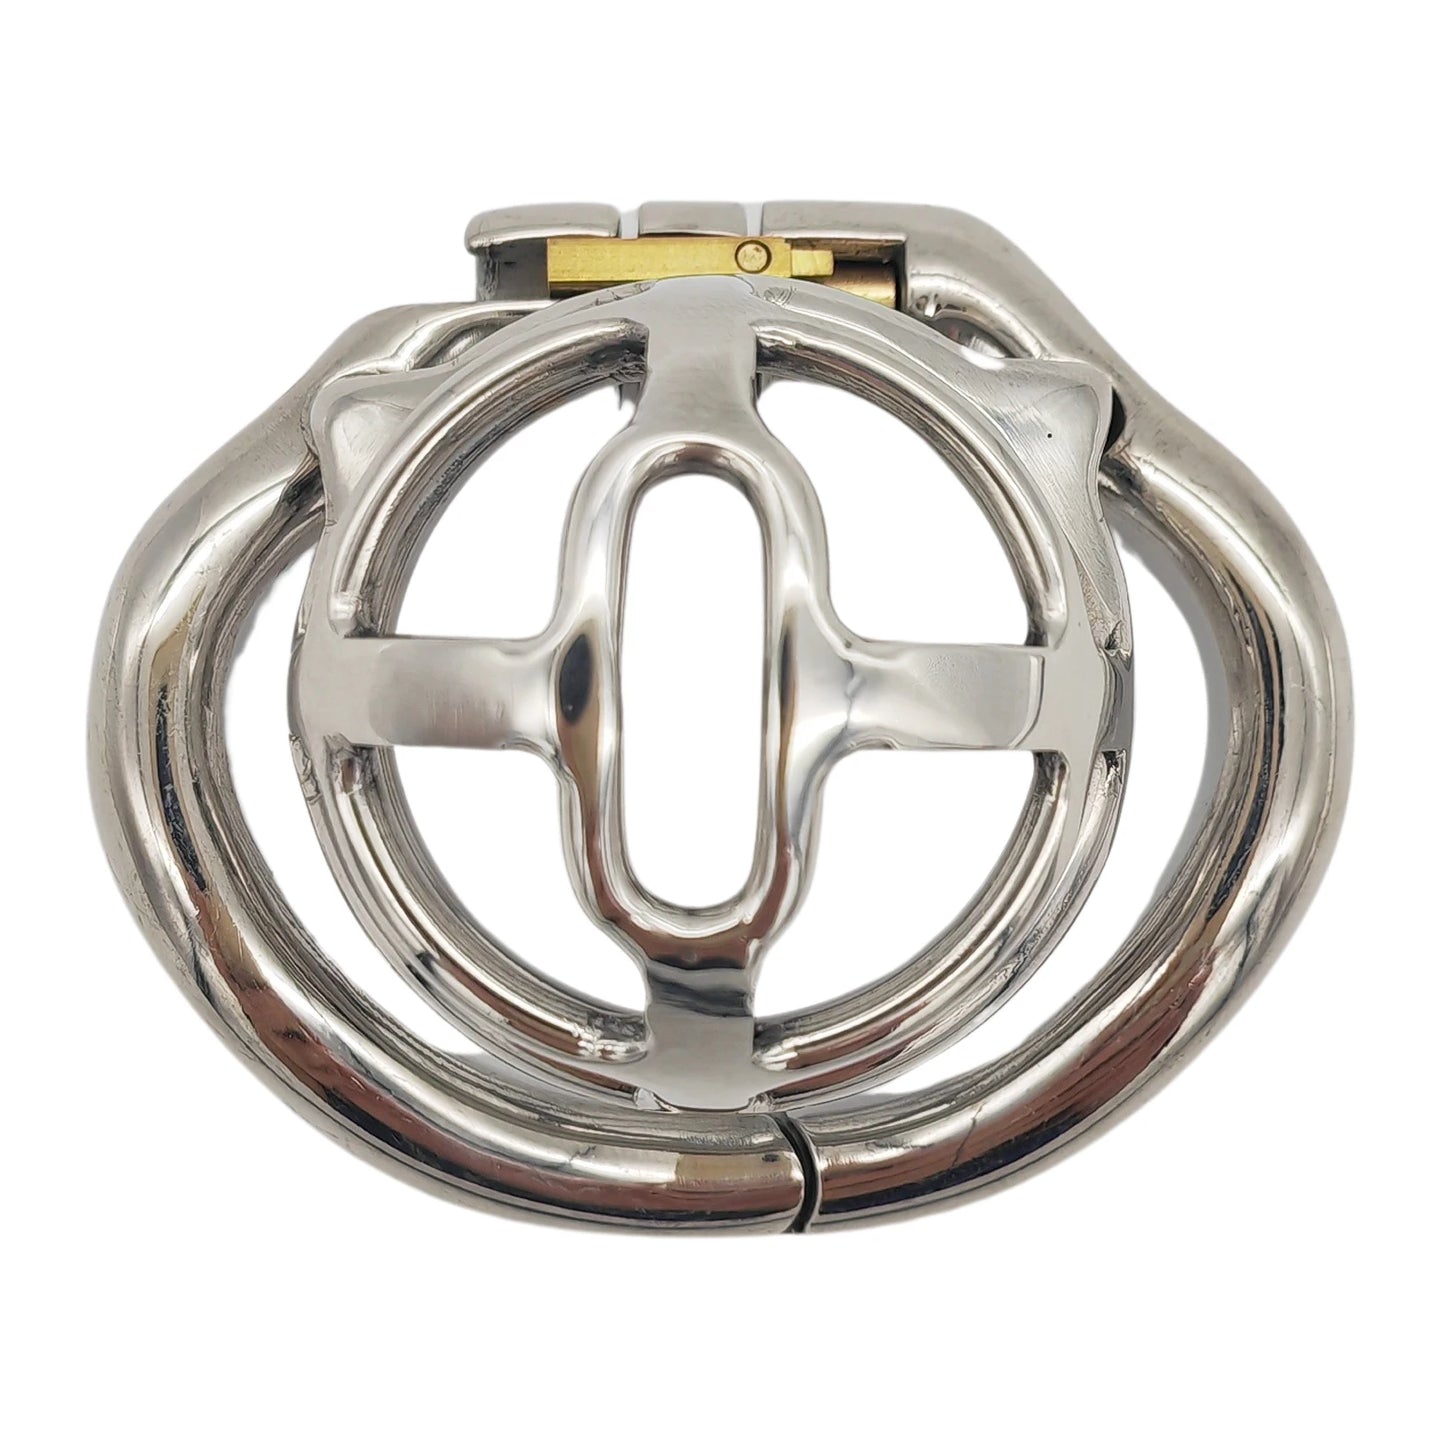 Small Size Stainless Steel Male Flat Chastity Cage Device